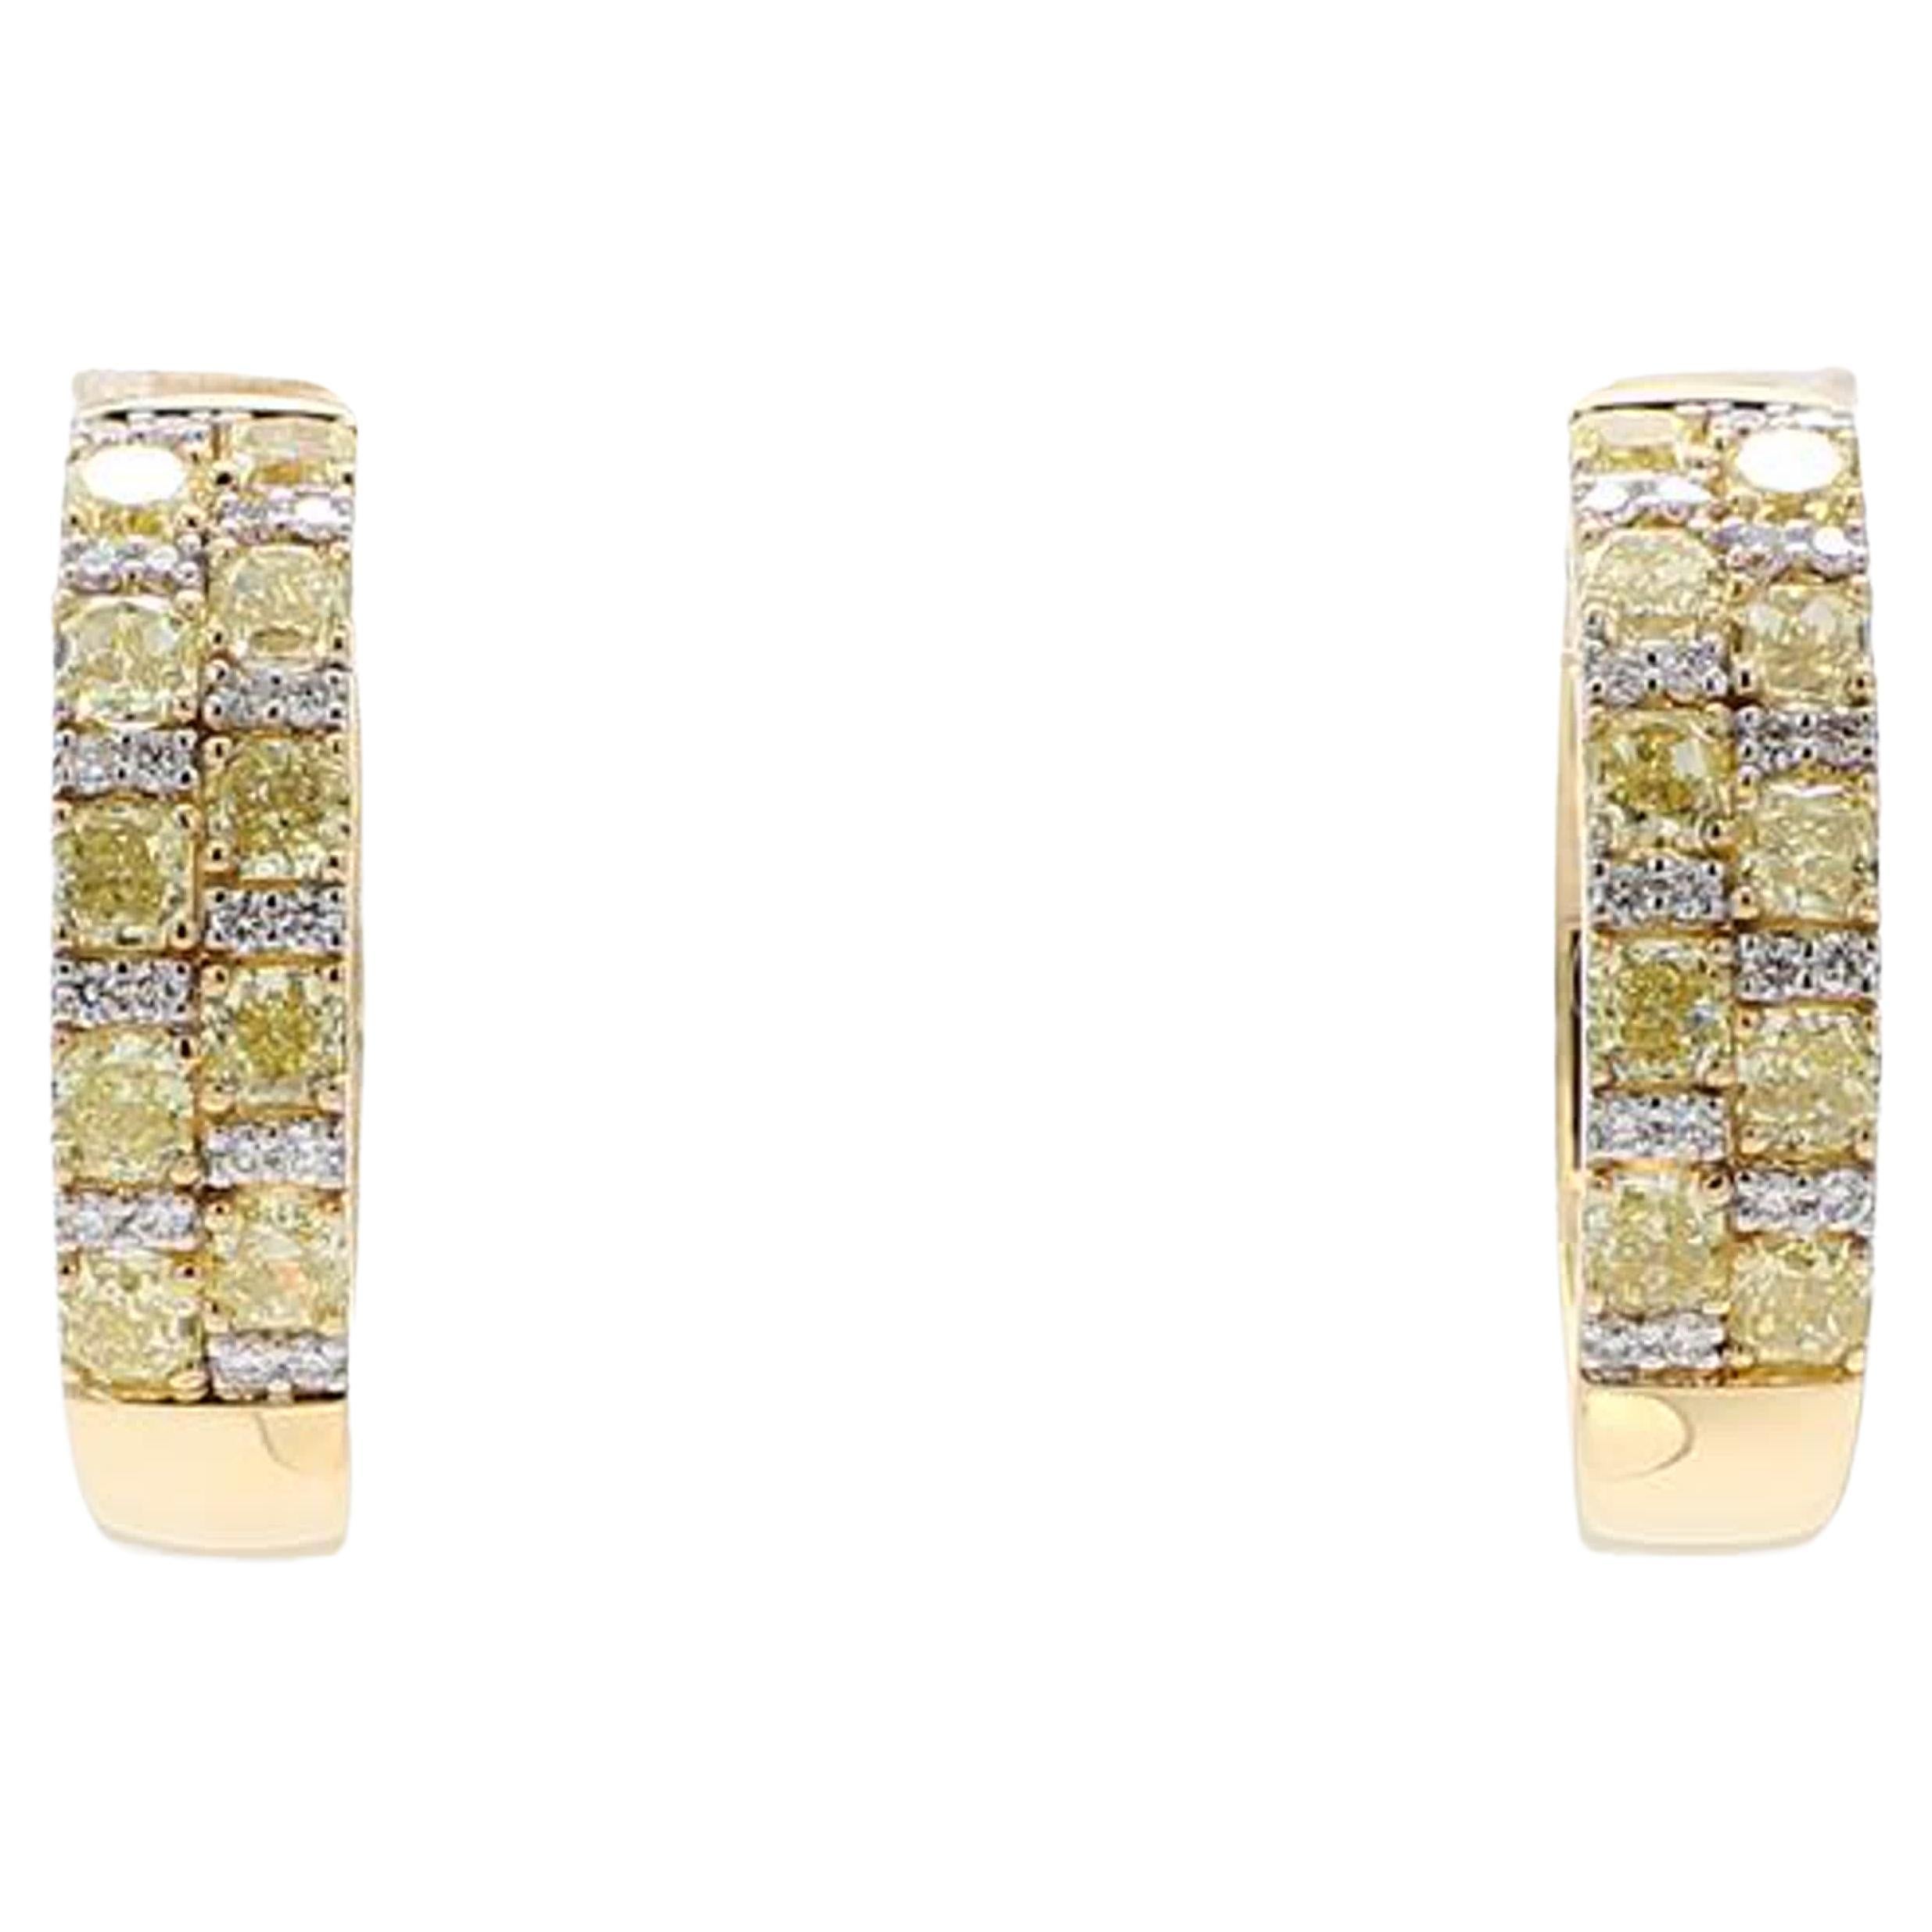 Natural Yellow Radiant and White Diamond 1.66 Carat TW Yellow Gold Earrings